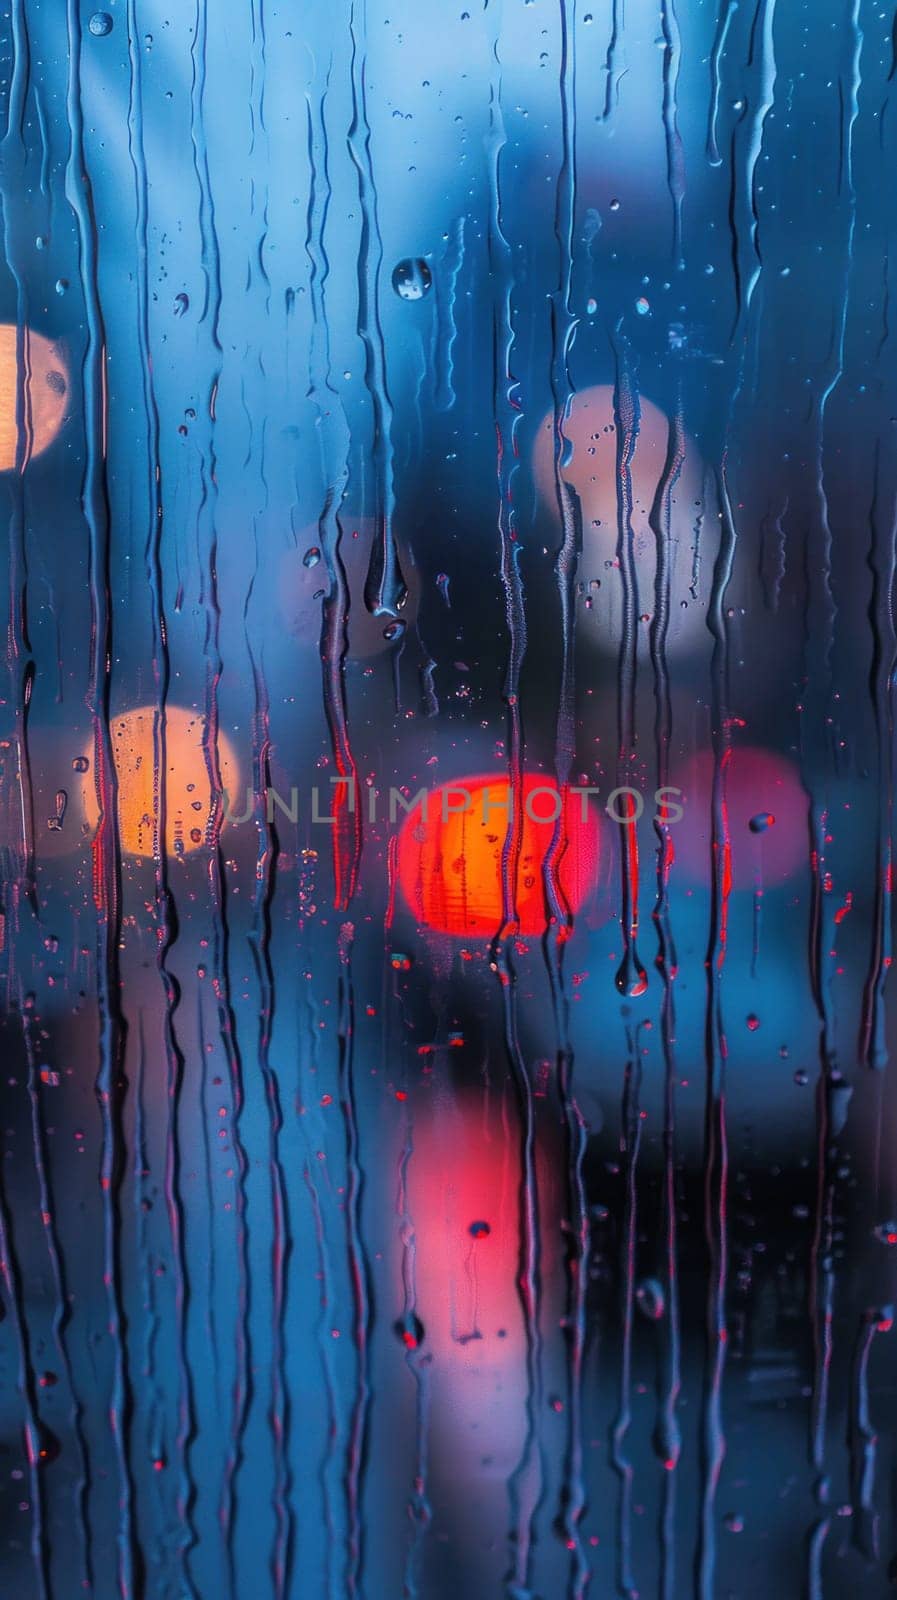 A blurry image of raindrops on a window by golfmerrymaker